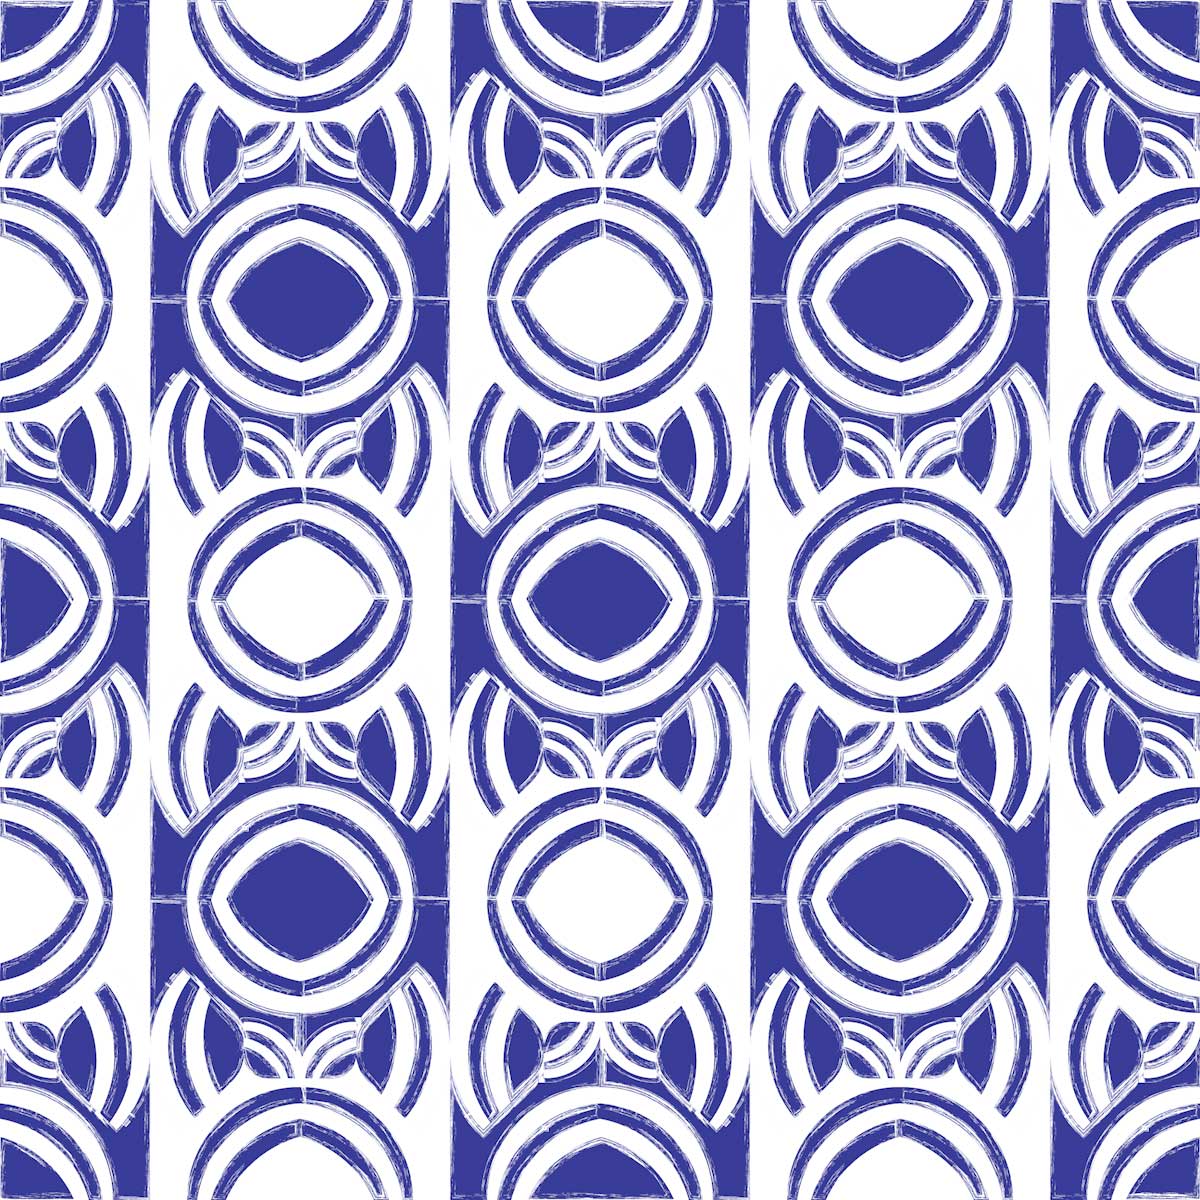 Shelly pattern download. No cost to download and free to use in commercial and personal projects Illustrator free pattern download. 